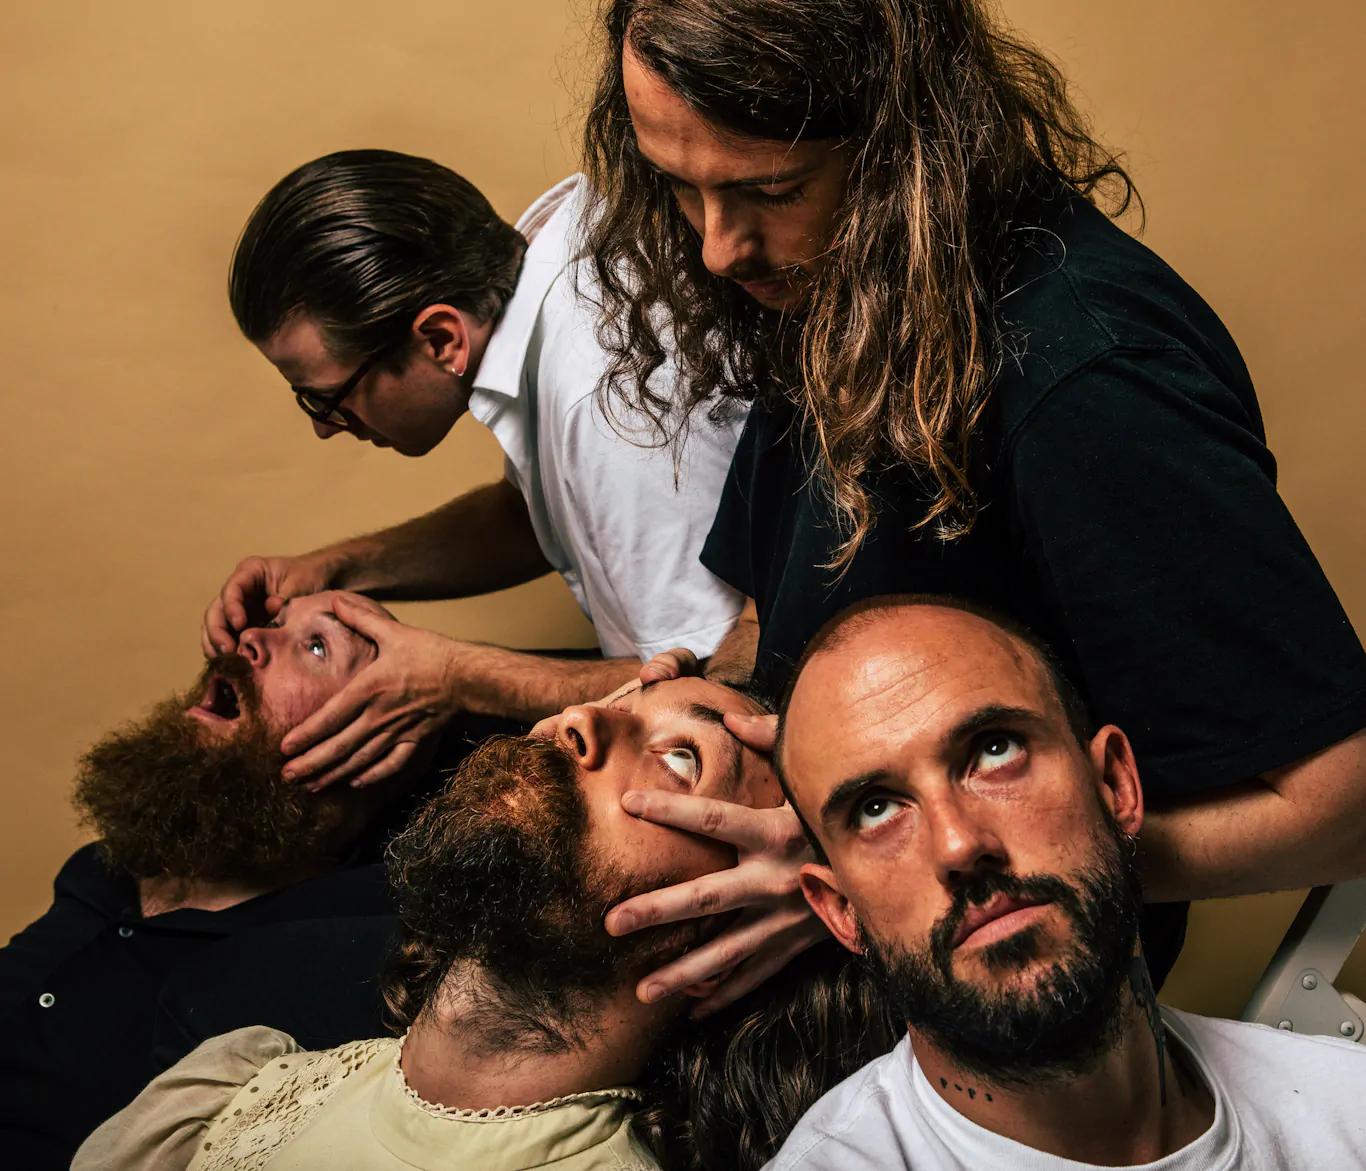 IDLES release video for ‘When The Lights Come On’